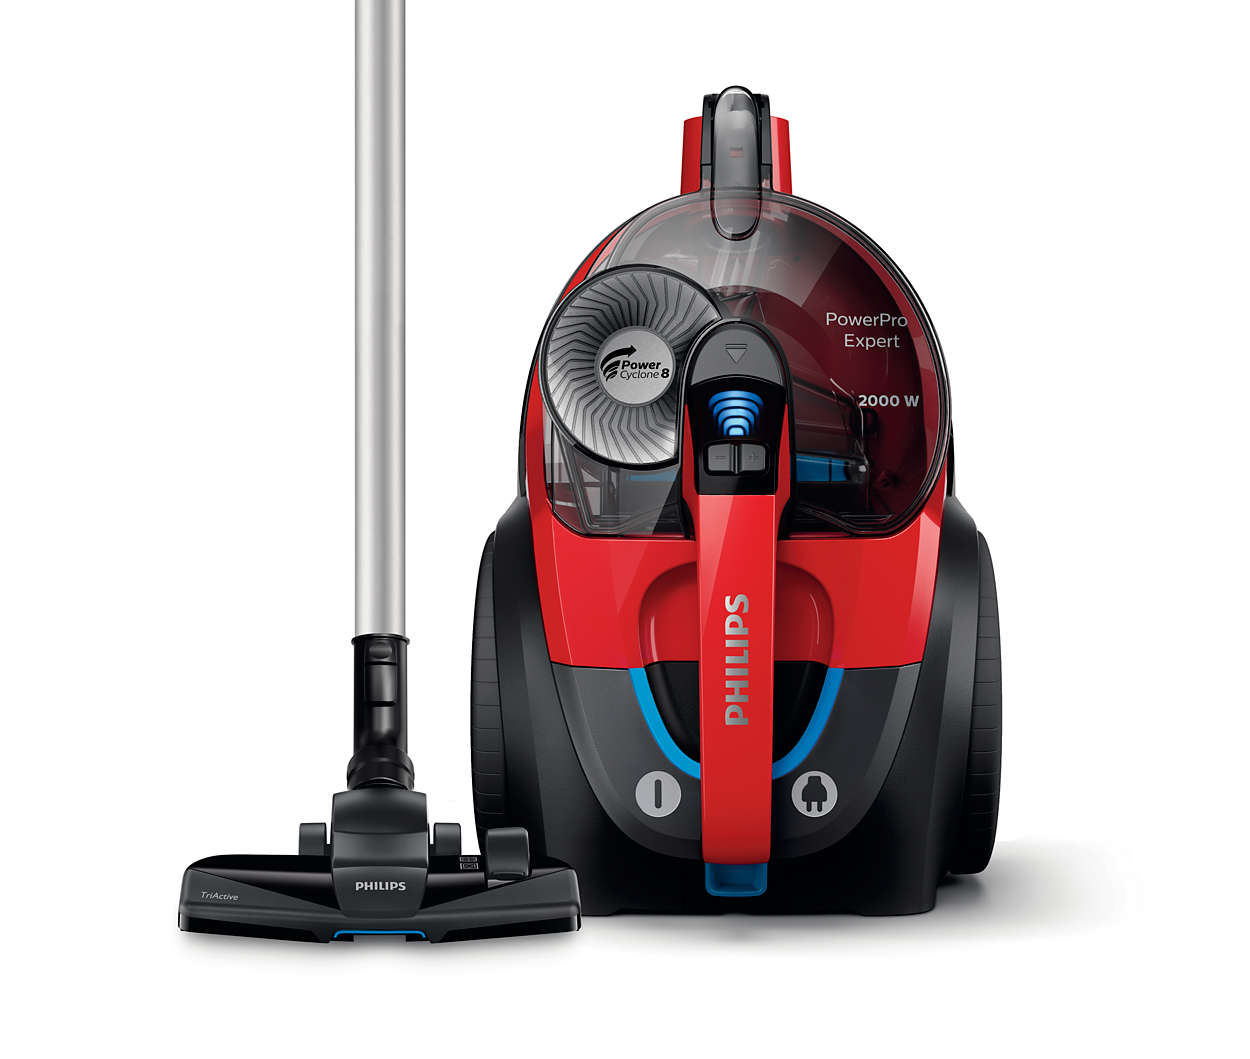 The wonder-working suction power of the Philips PowerPro Expert Bagless Vacuum Cleaner is arguably the strongest on the list
Source; Lazada.com